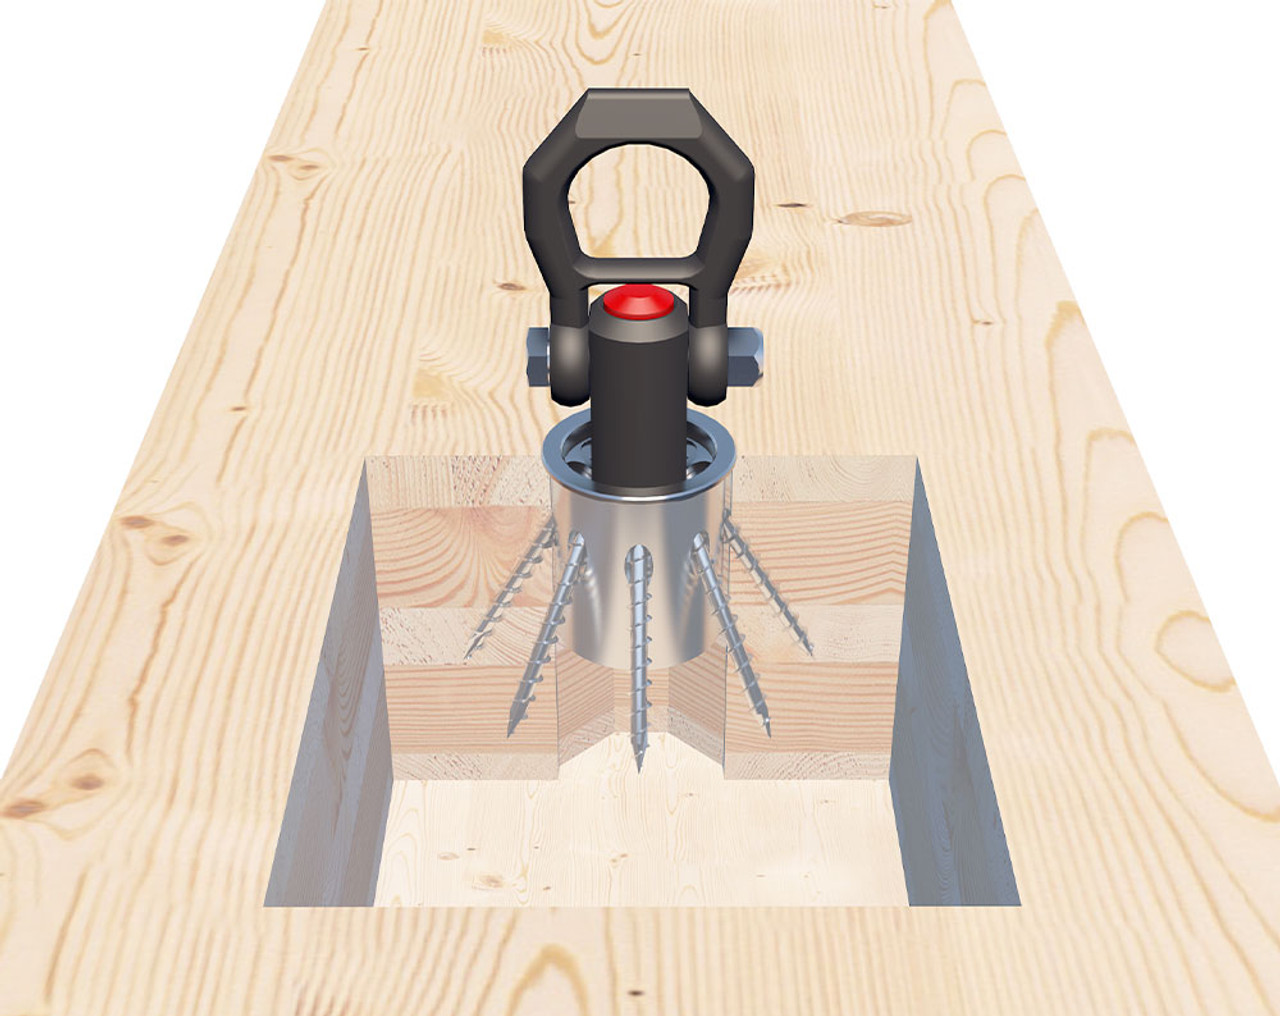 EUROTEC Assembly Tools HEBEFIX  with  MINI Anchor Connectors for the Workers and Installers in Cross Laminated Timber